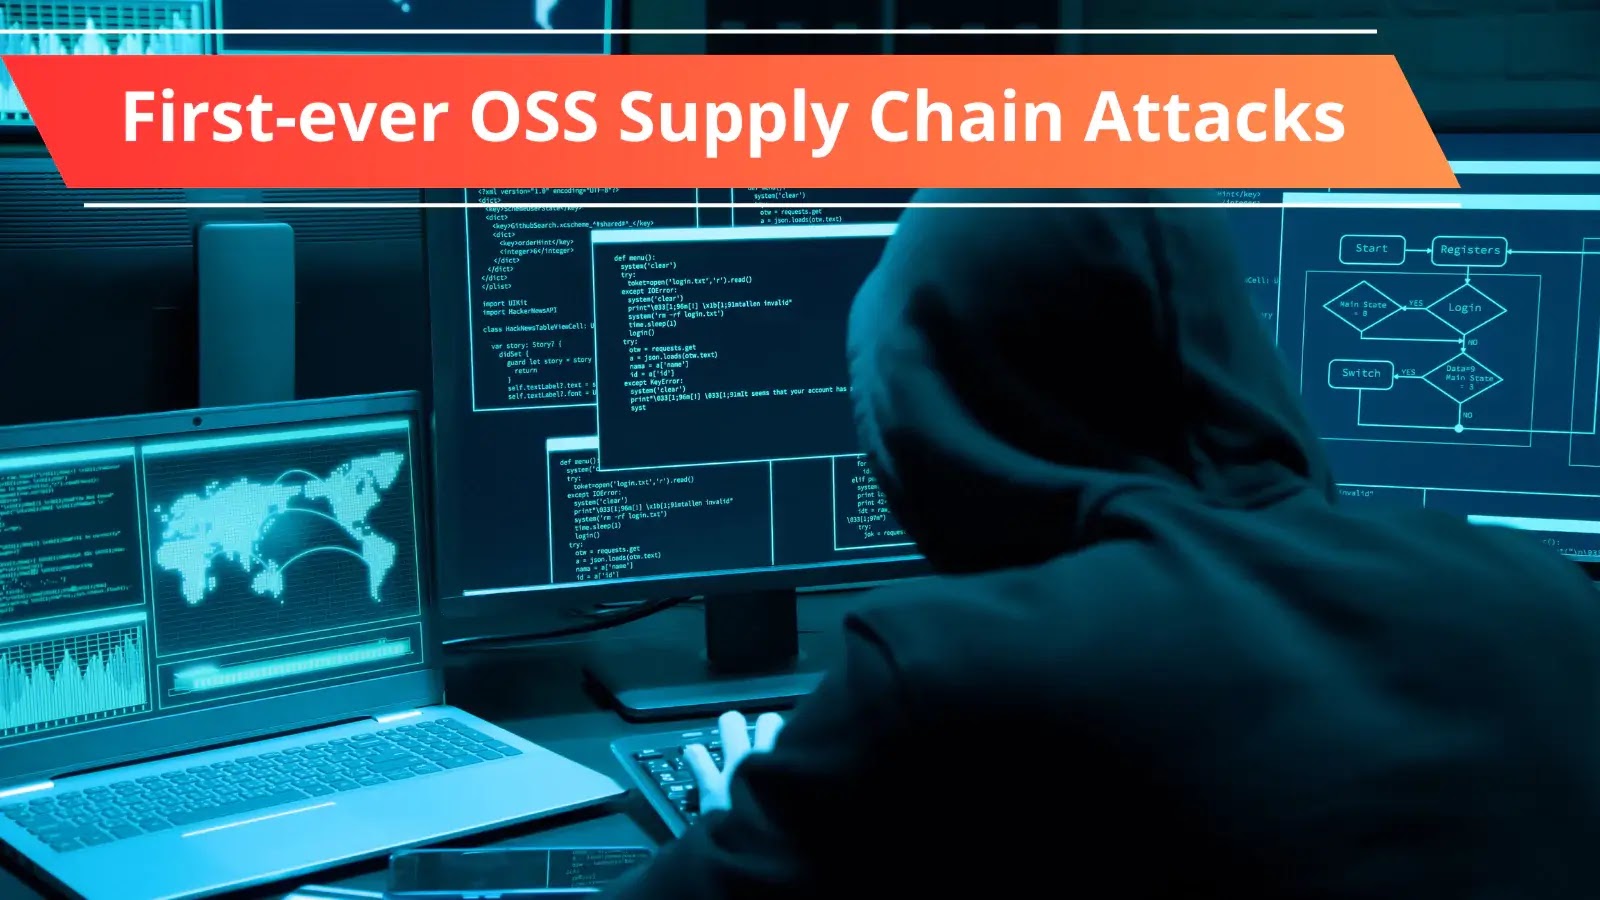 Experts warn of OSS supply chain attacks against the banking sector